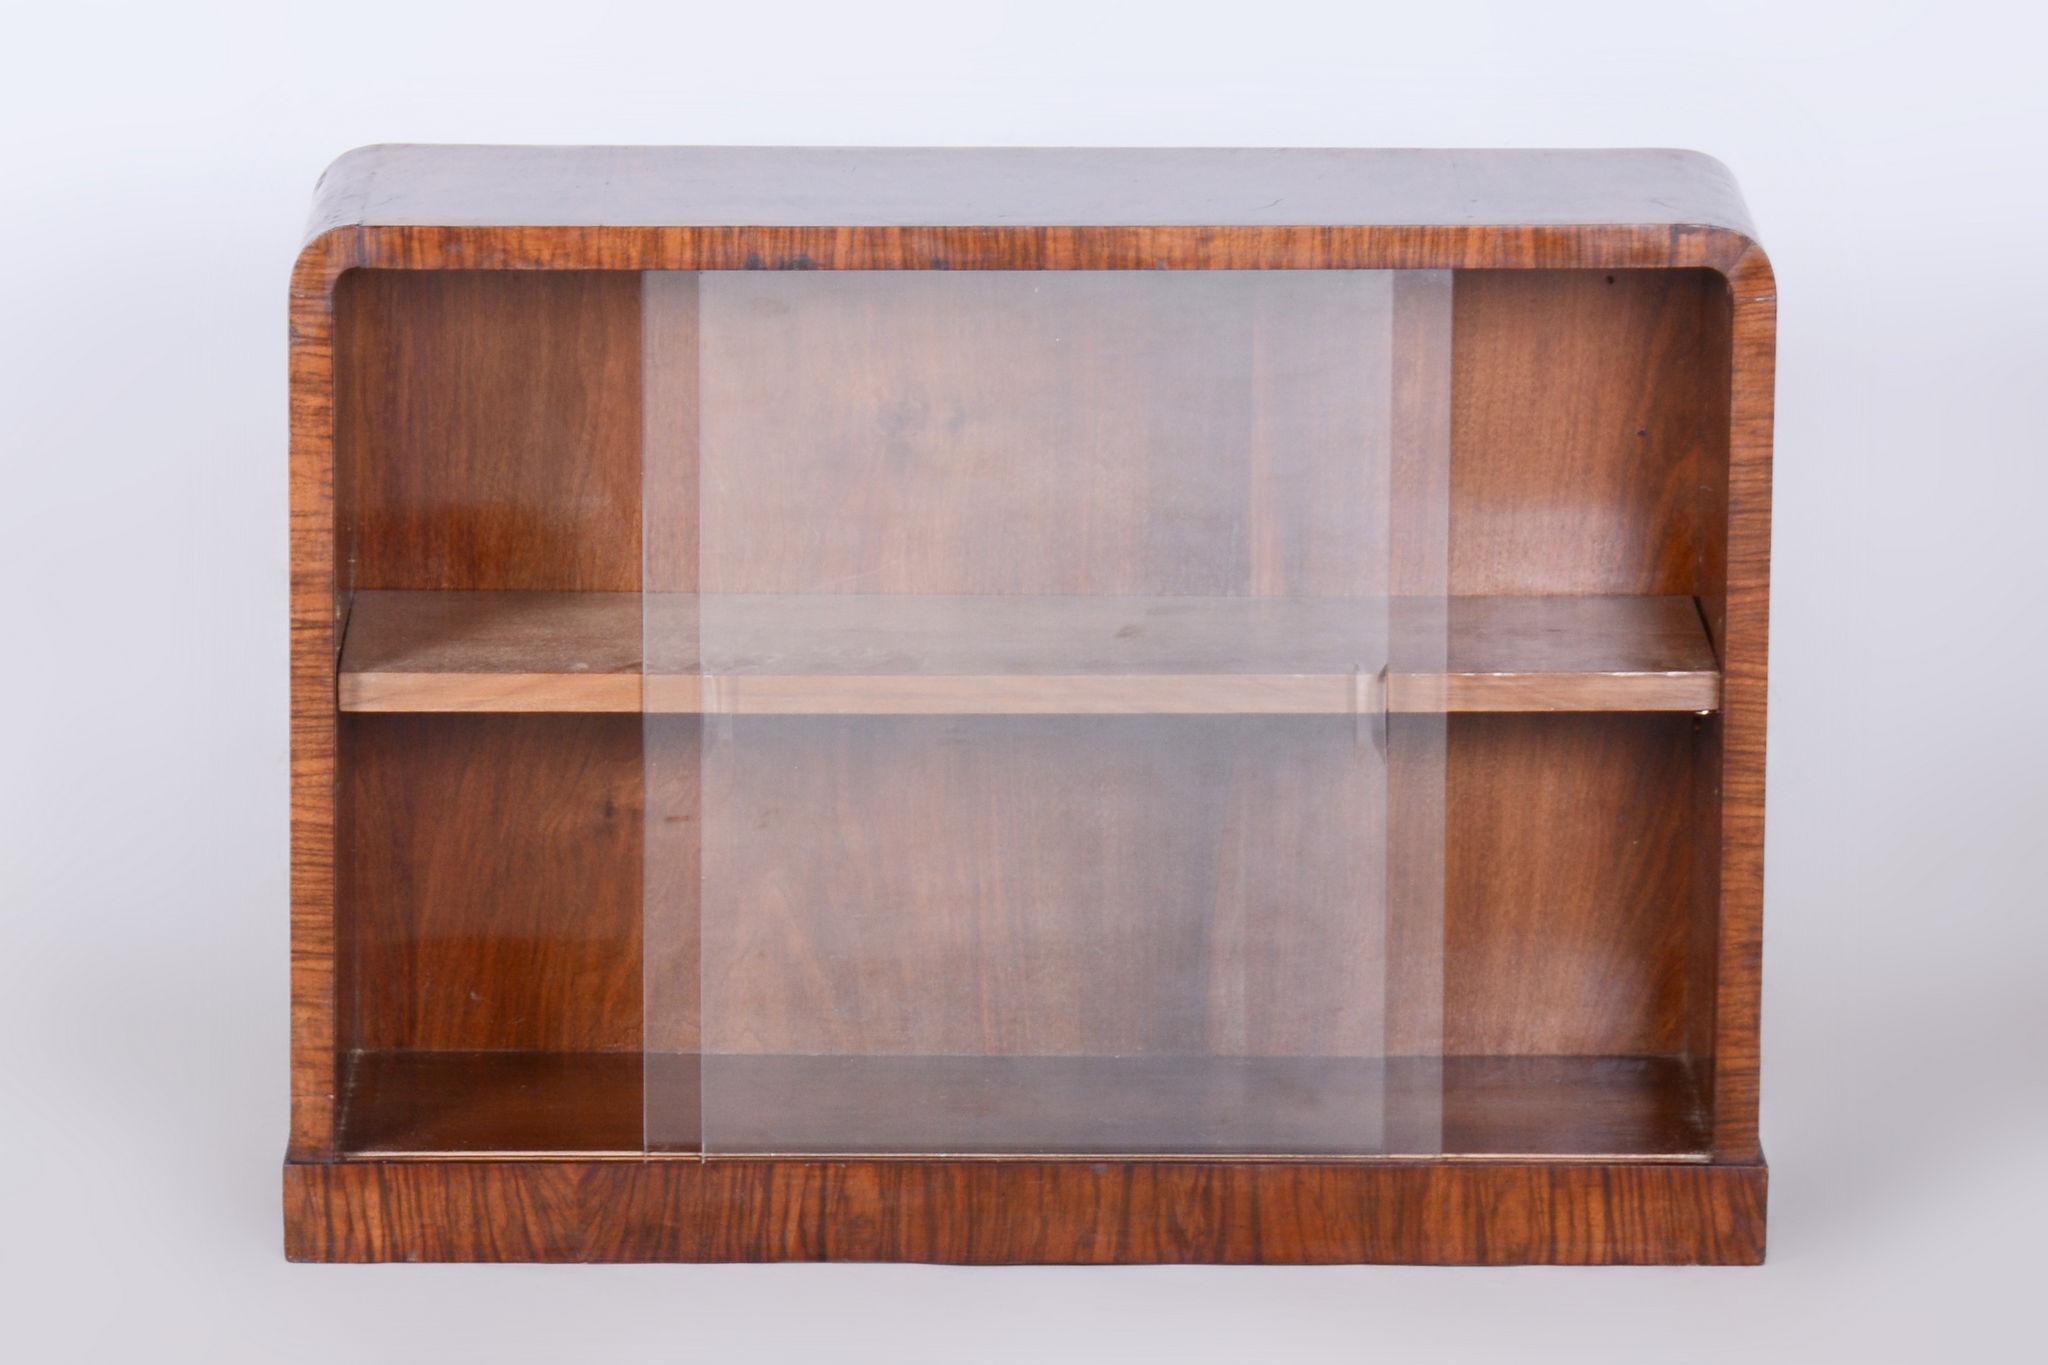 Wood Small Restored Art Deco Display Bookcase, Walnut and Glass, Czech, 1930s For Sale